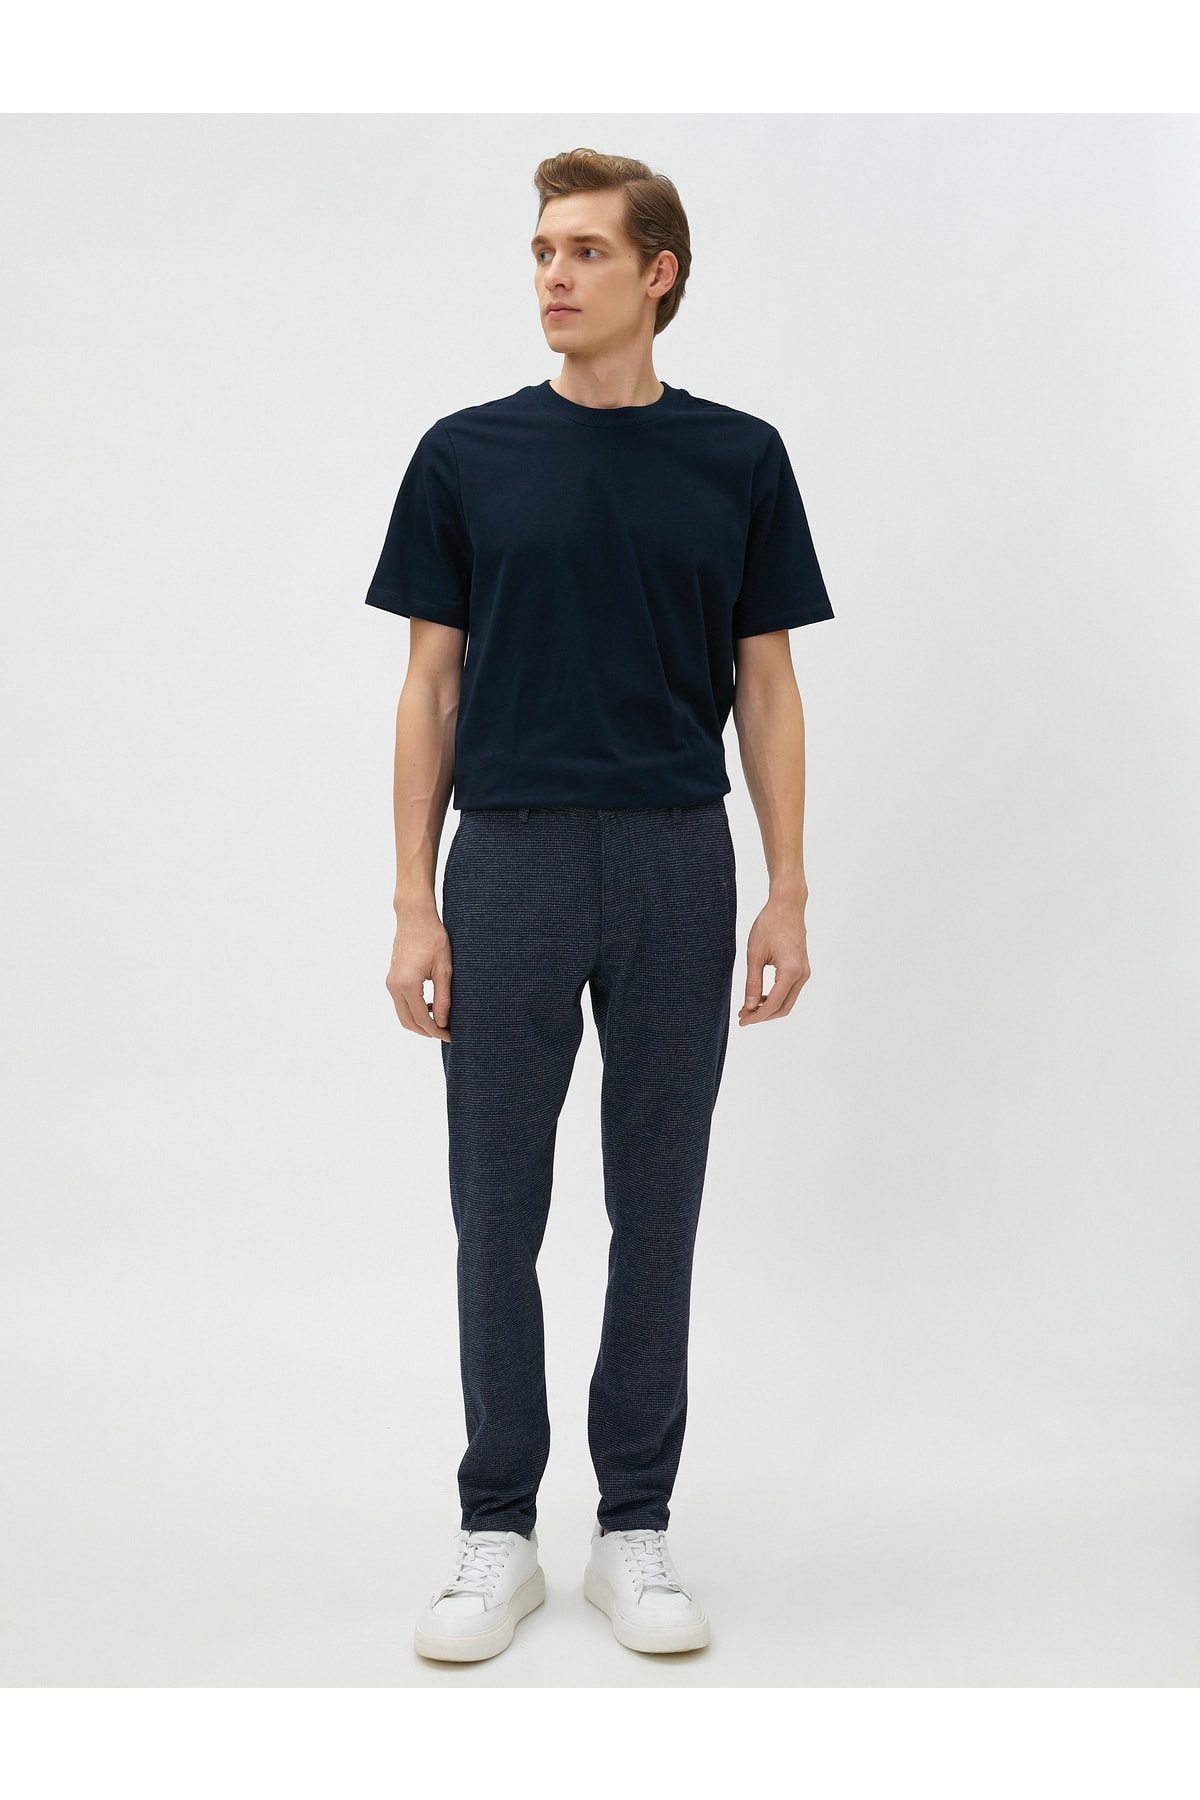 Koton Woven Trousers with Crowbarn Detailed Buttons and Pockets.